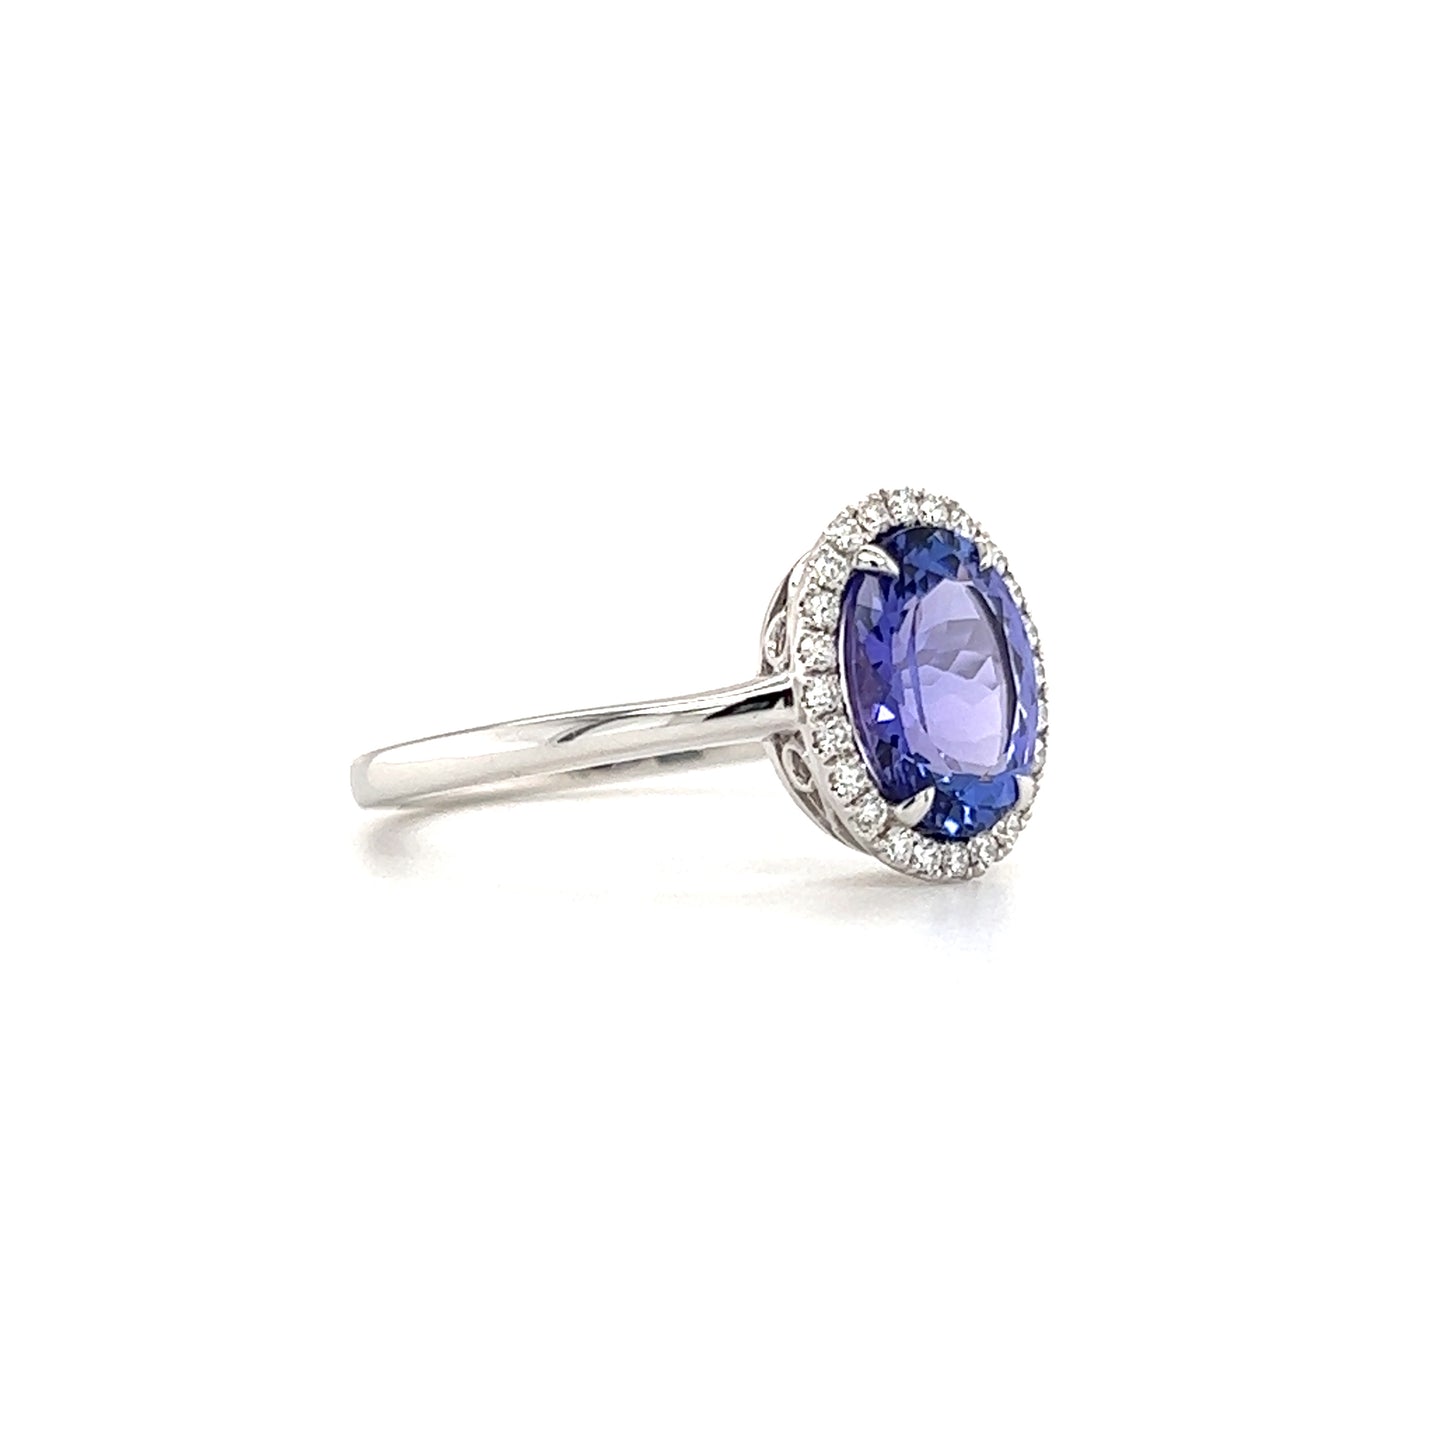 Oval Tanzanite Ring with 1.75ctw of Tanzanite and Diamond Halo in 14K White Gold Left Side View